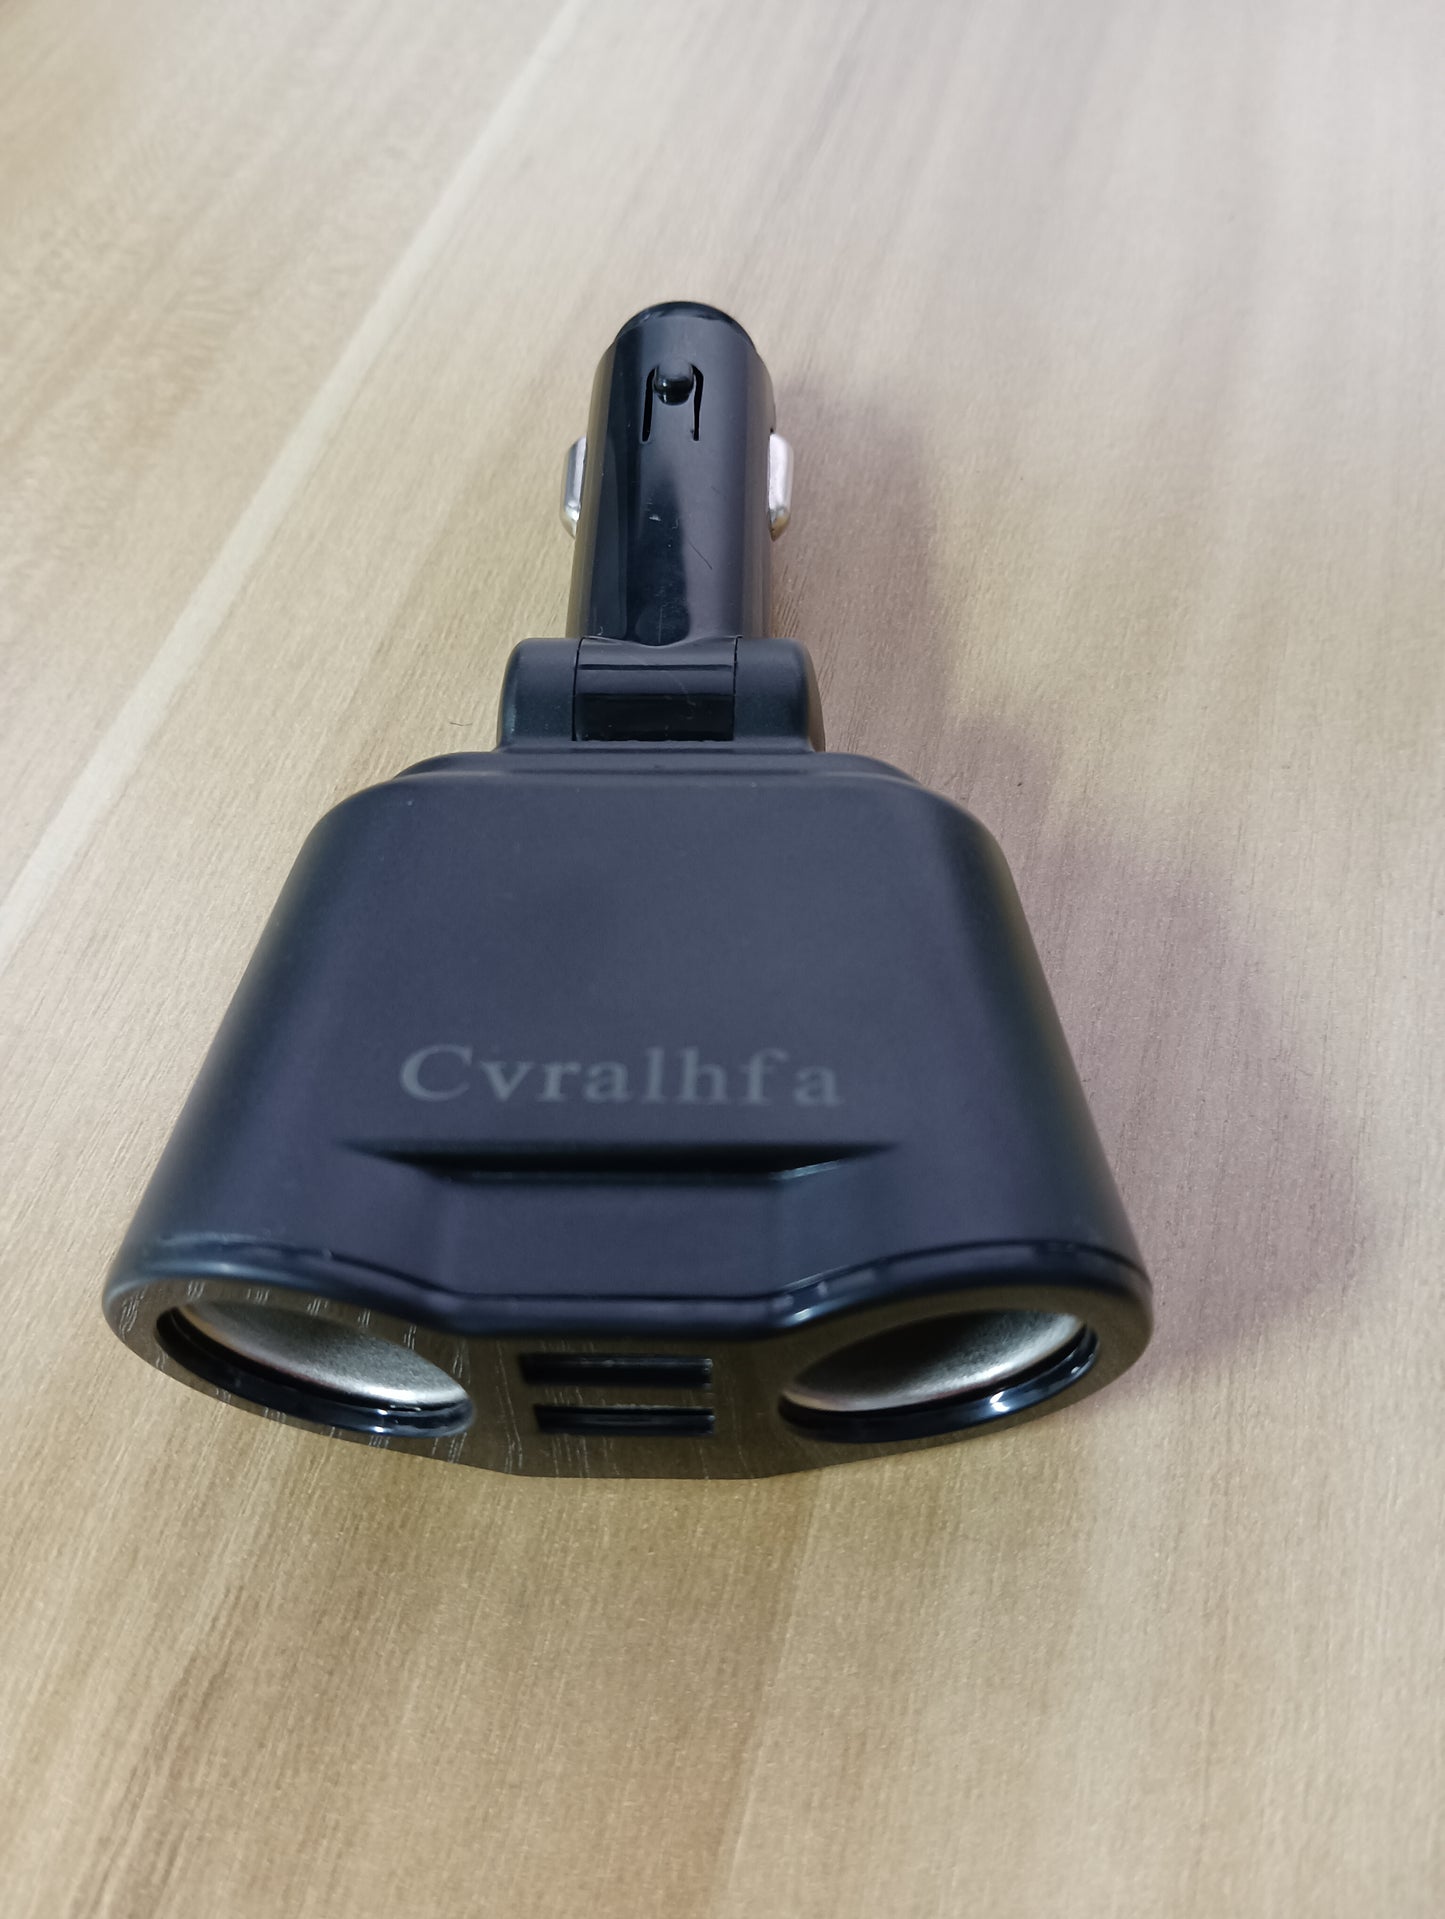 Cvralhfa Cigarette Lighter for Automobiles with 2 USB Ports and Intelligent Chip Black, ABS Material, 13x3.2x7.6cm, Dual Socket, 90W Power, 54A Splitter, 120 Degree Adjustable